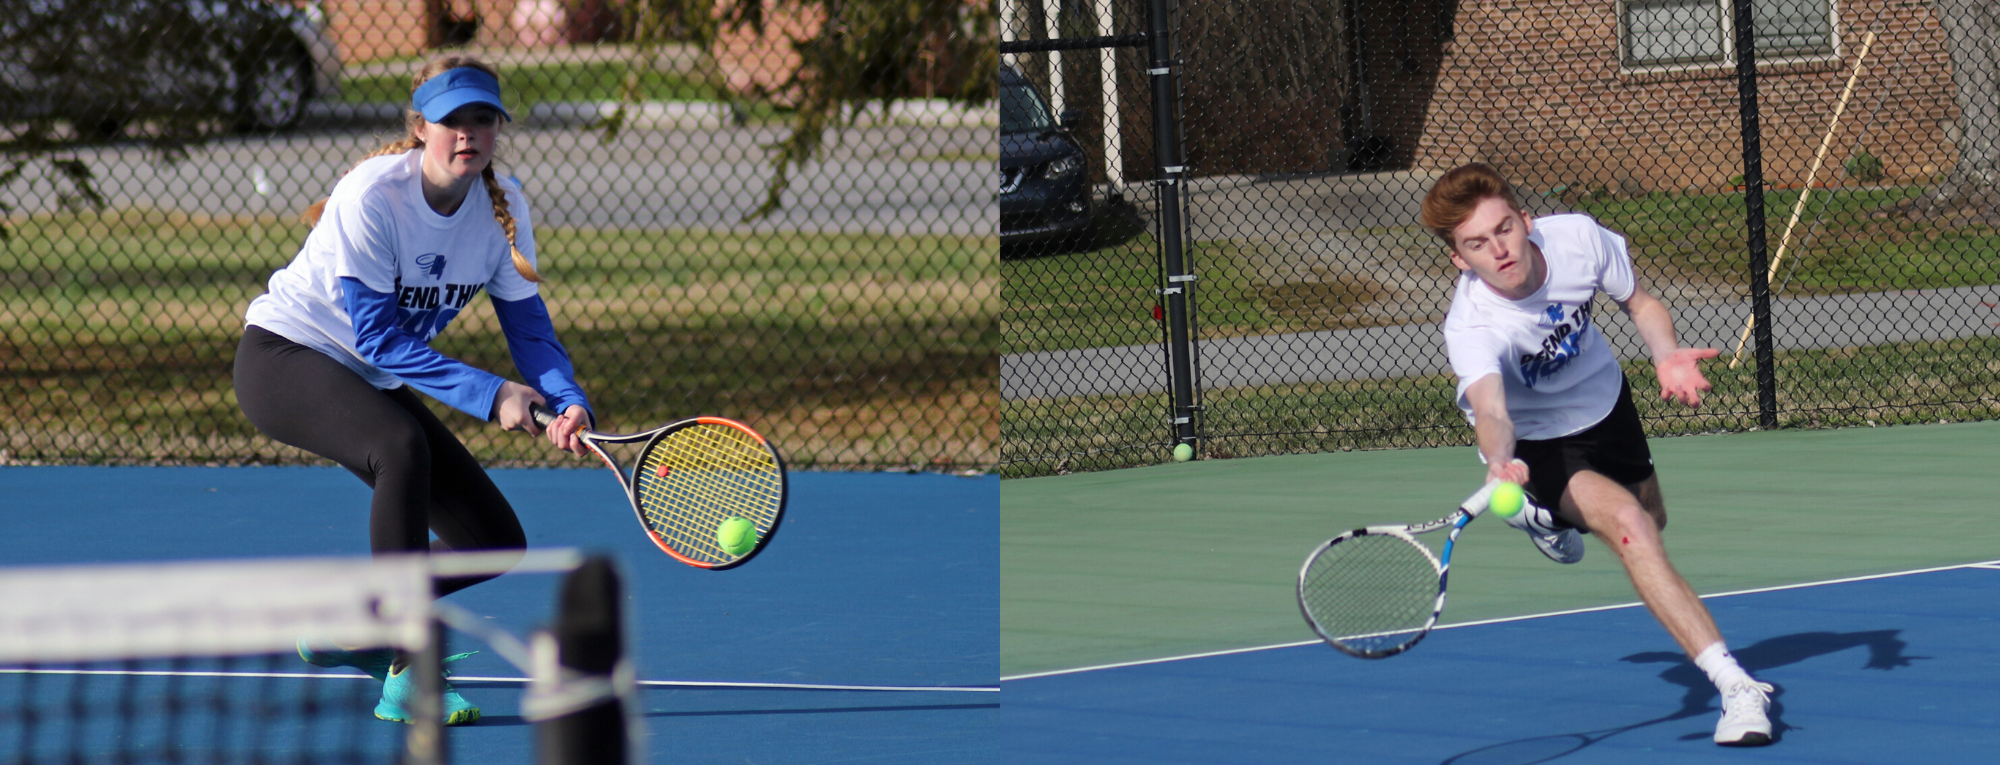 Sophomore Lily Farr (left) and freshman Miles Schafer (right) in action at the McCoy Tennis Complex (Photos courtesy of Dick Purselle).